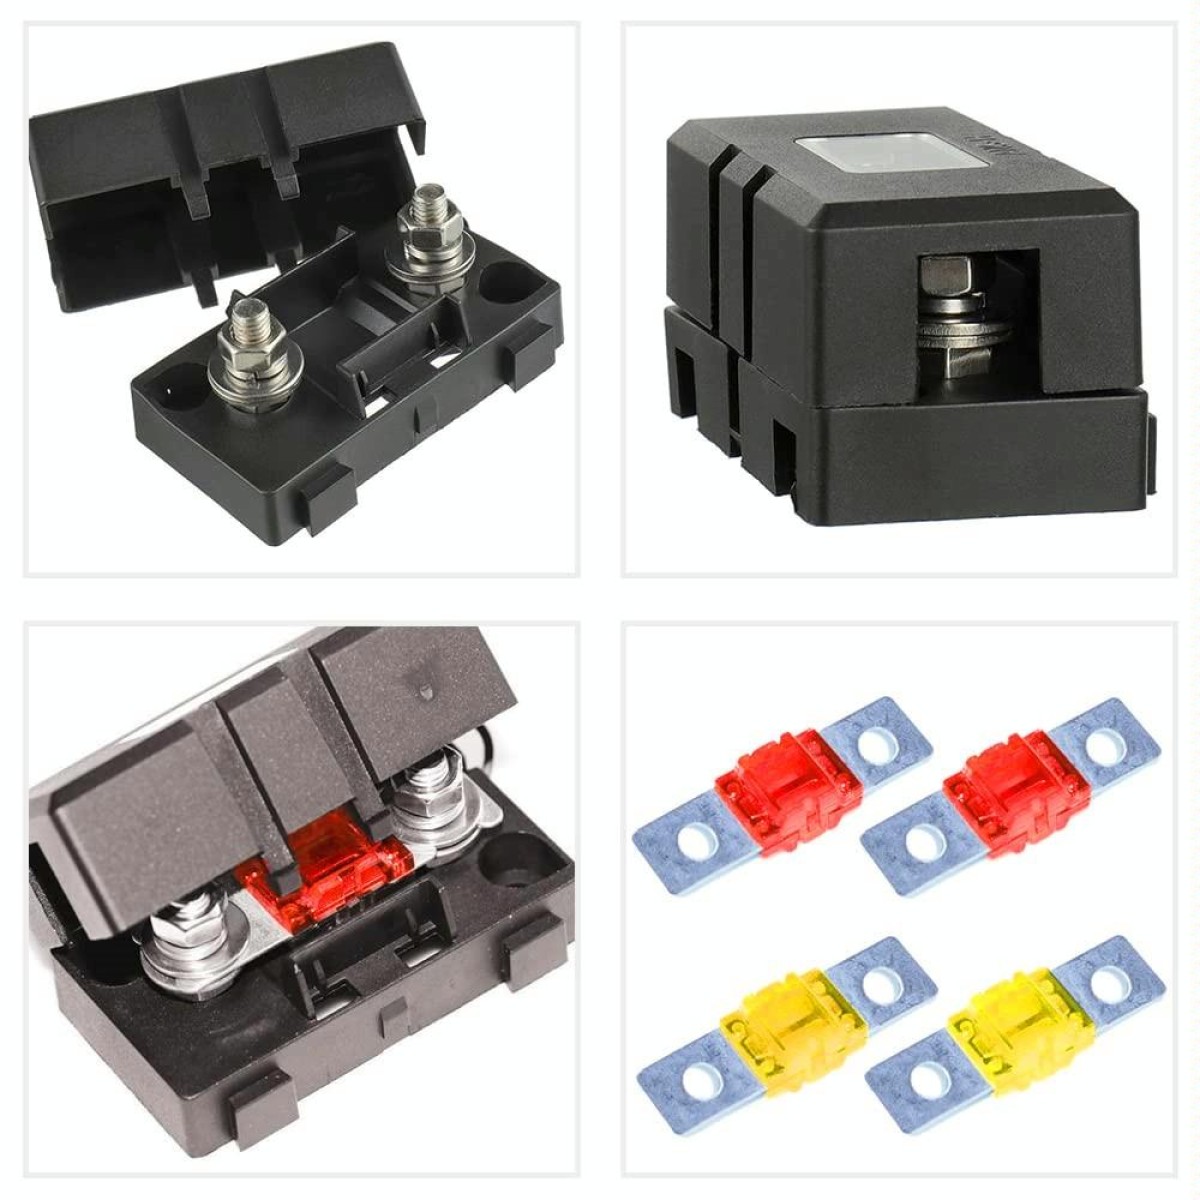 4 in 1 ANS-H Car Fuse Holder Fuse Box, Current:120A